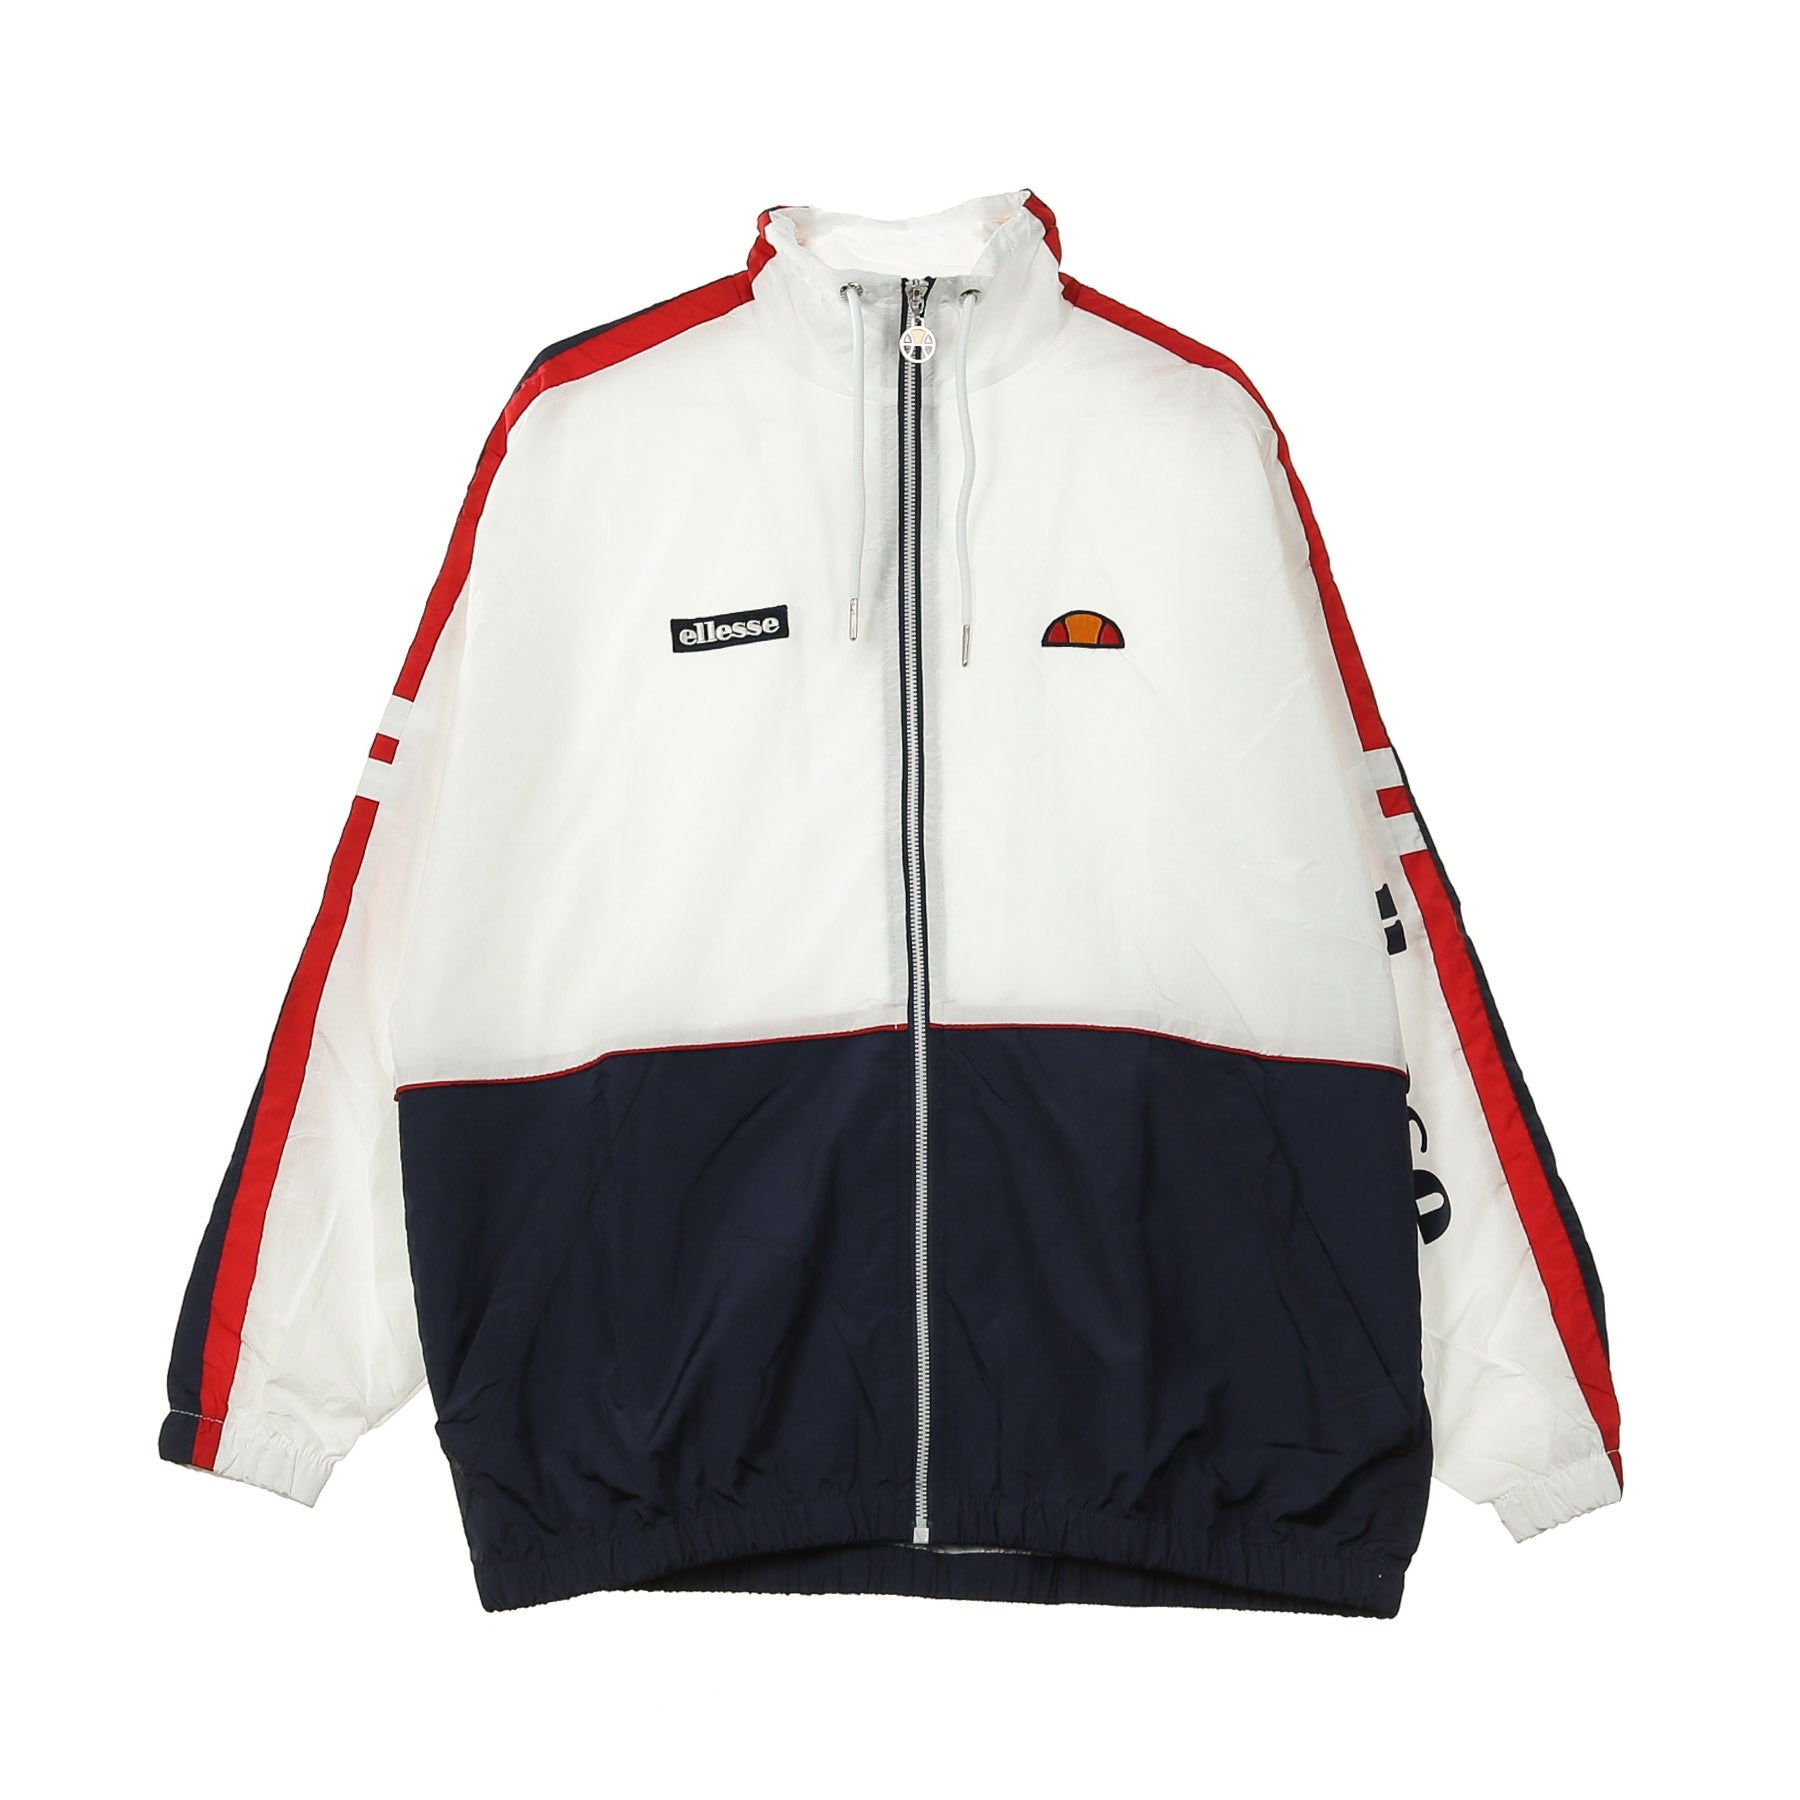 Ellesse, Giacca A Vento Donna Pampino, White/red/navy